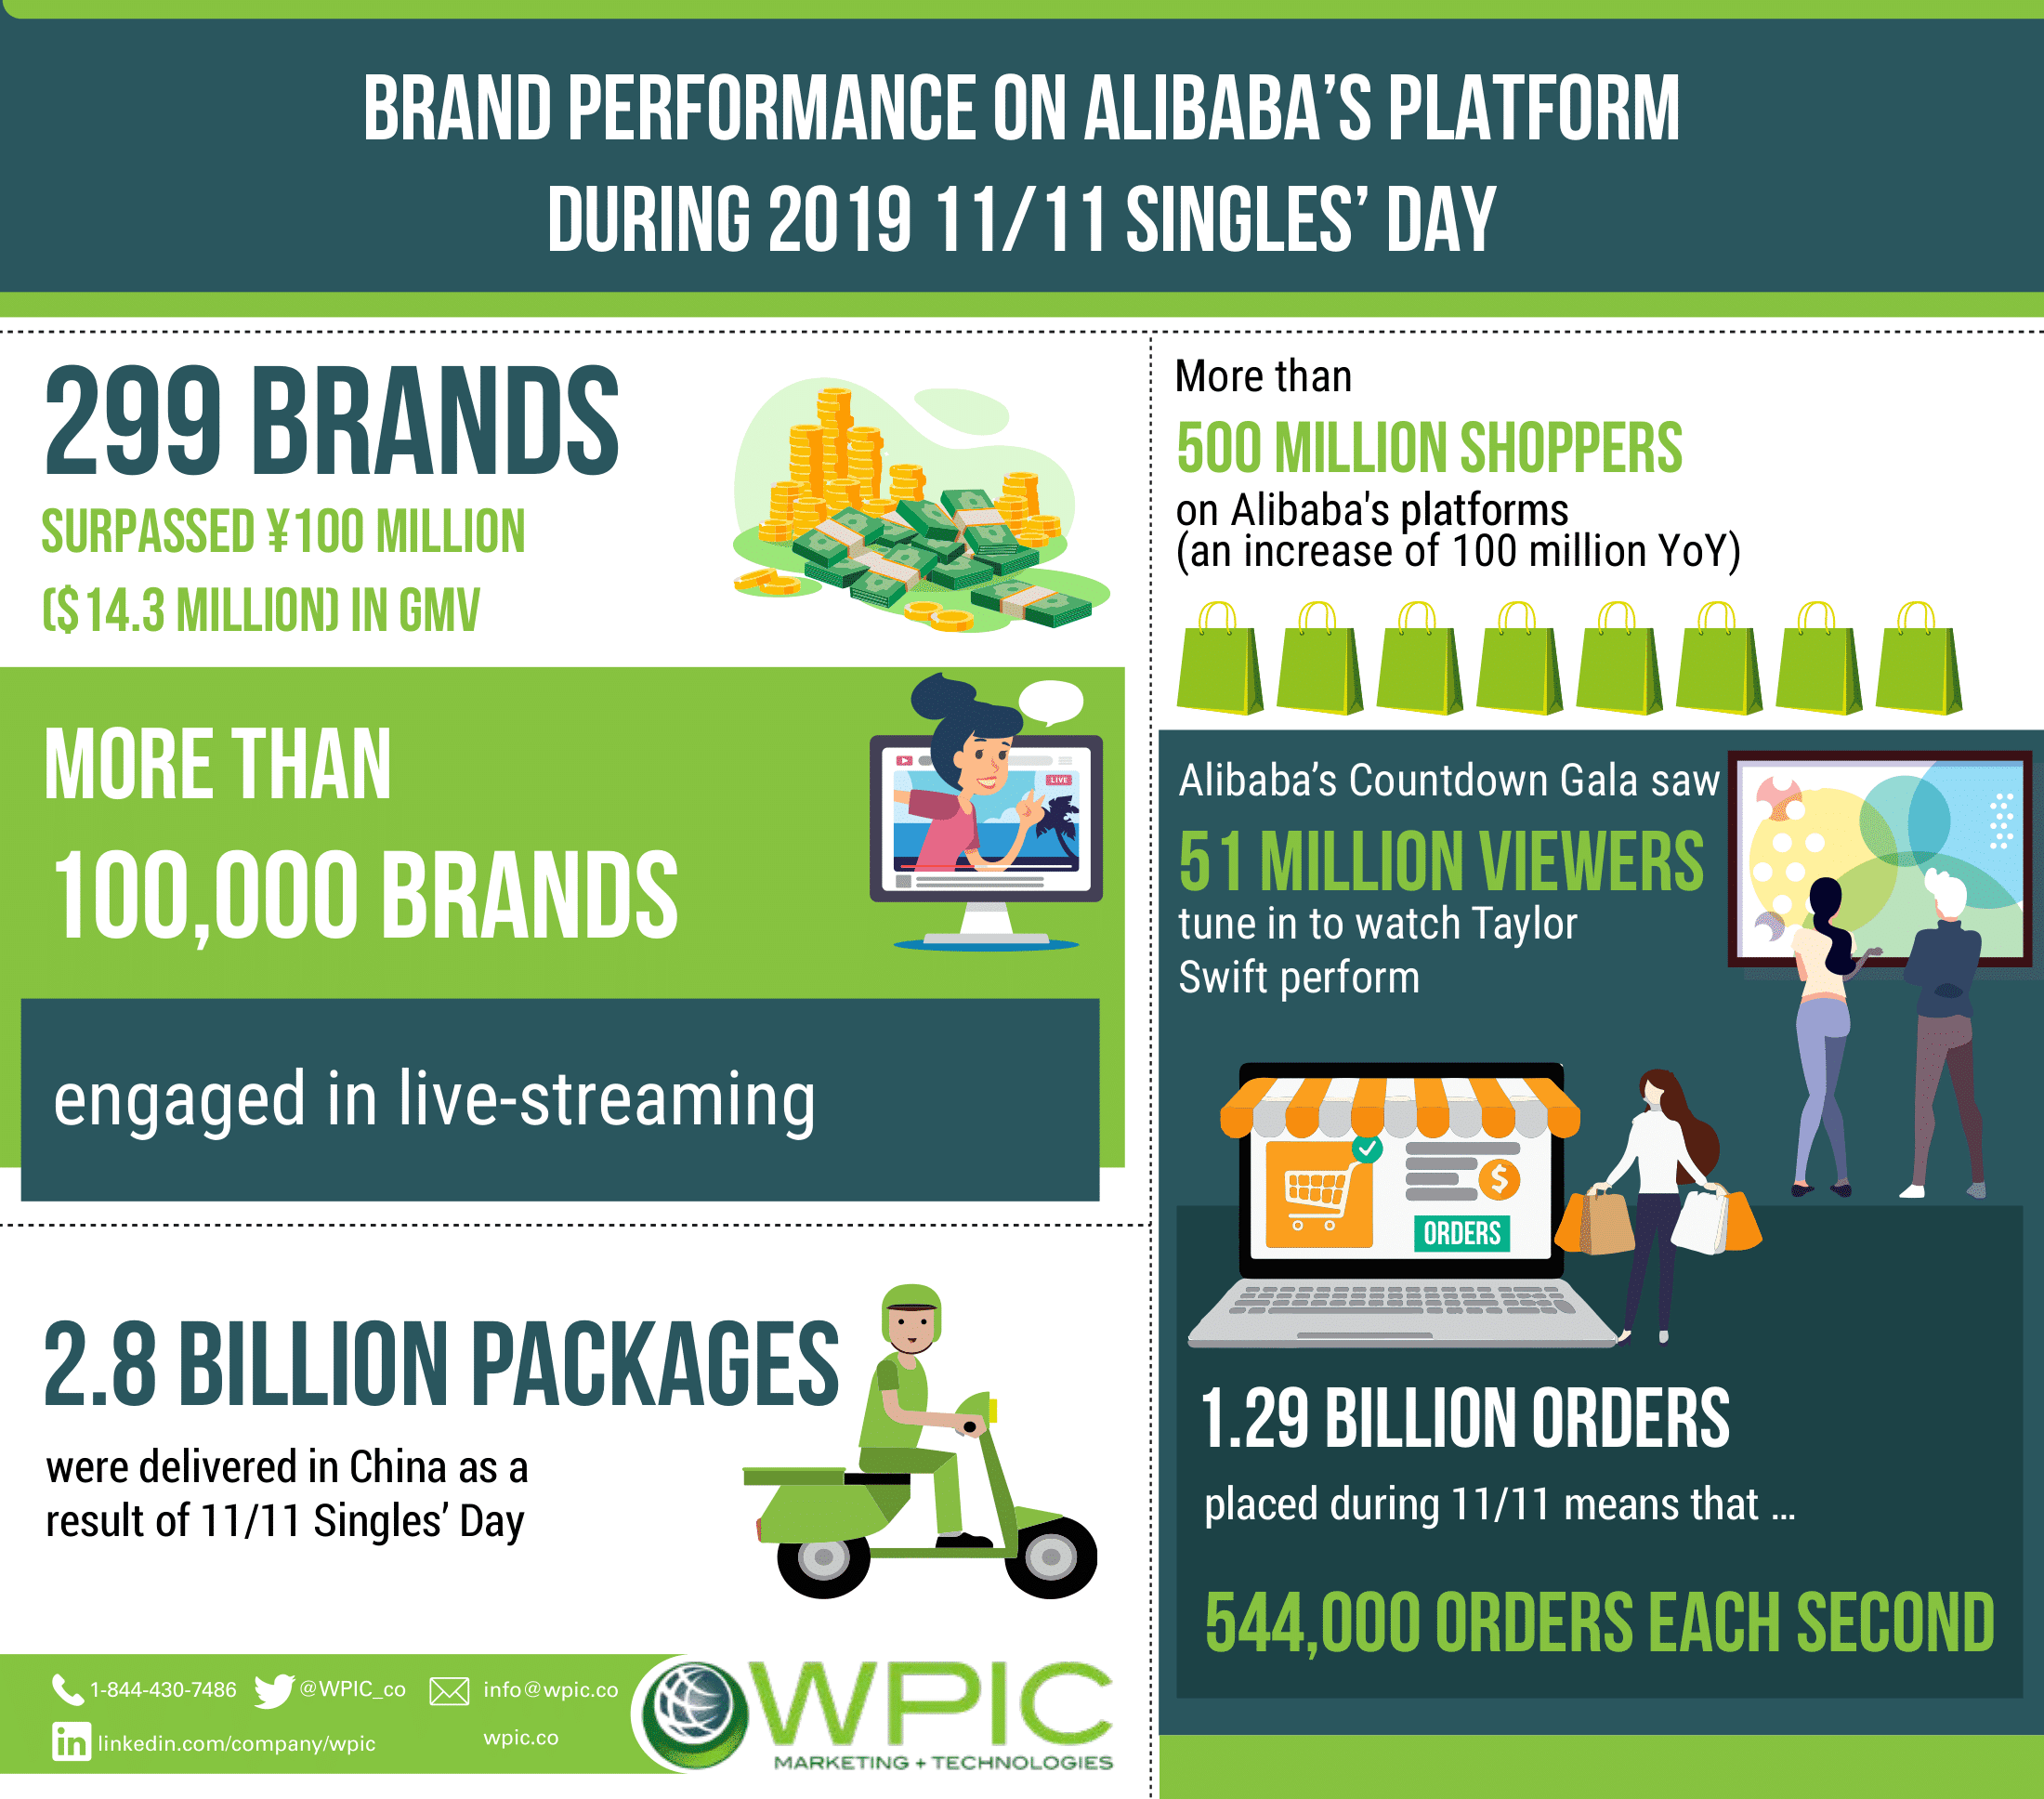 Brand performance on Alibaba’s platform during 2019 11/11 Singles’ Day infographic